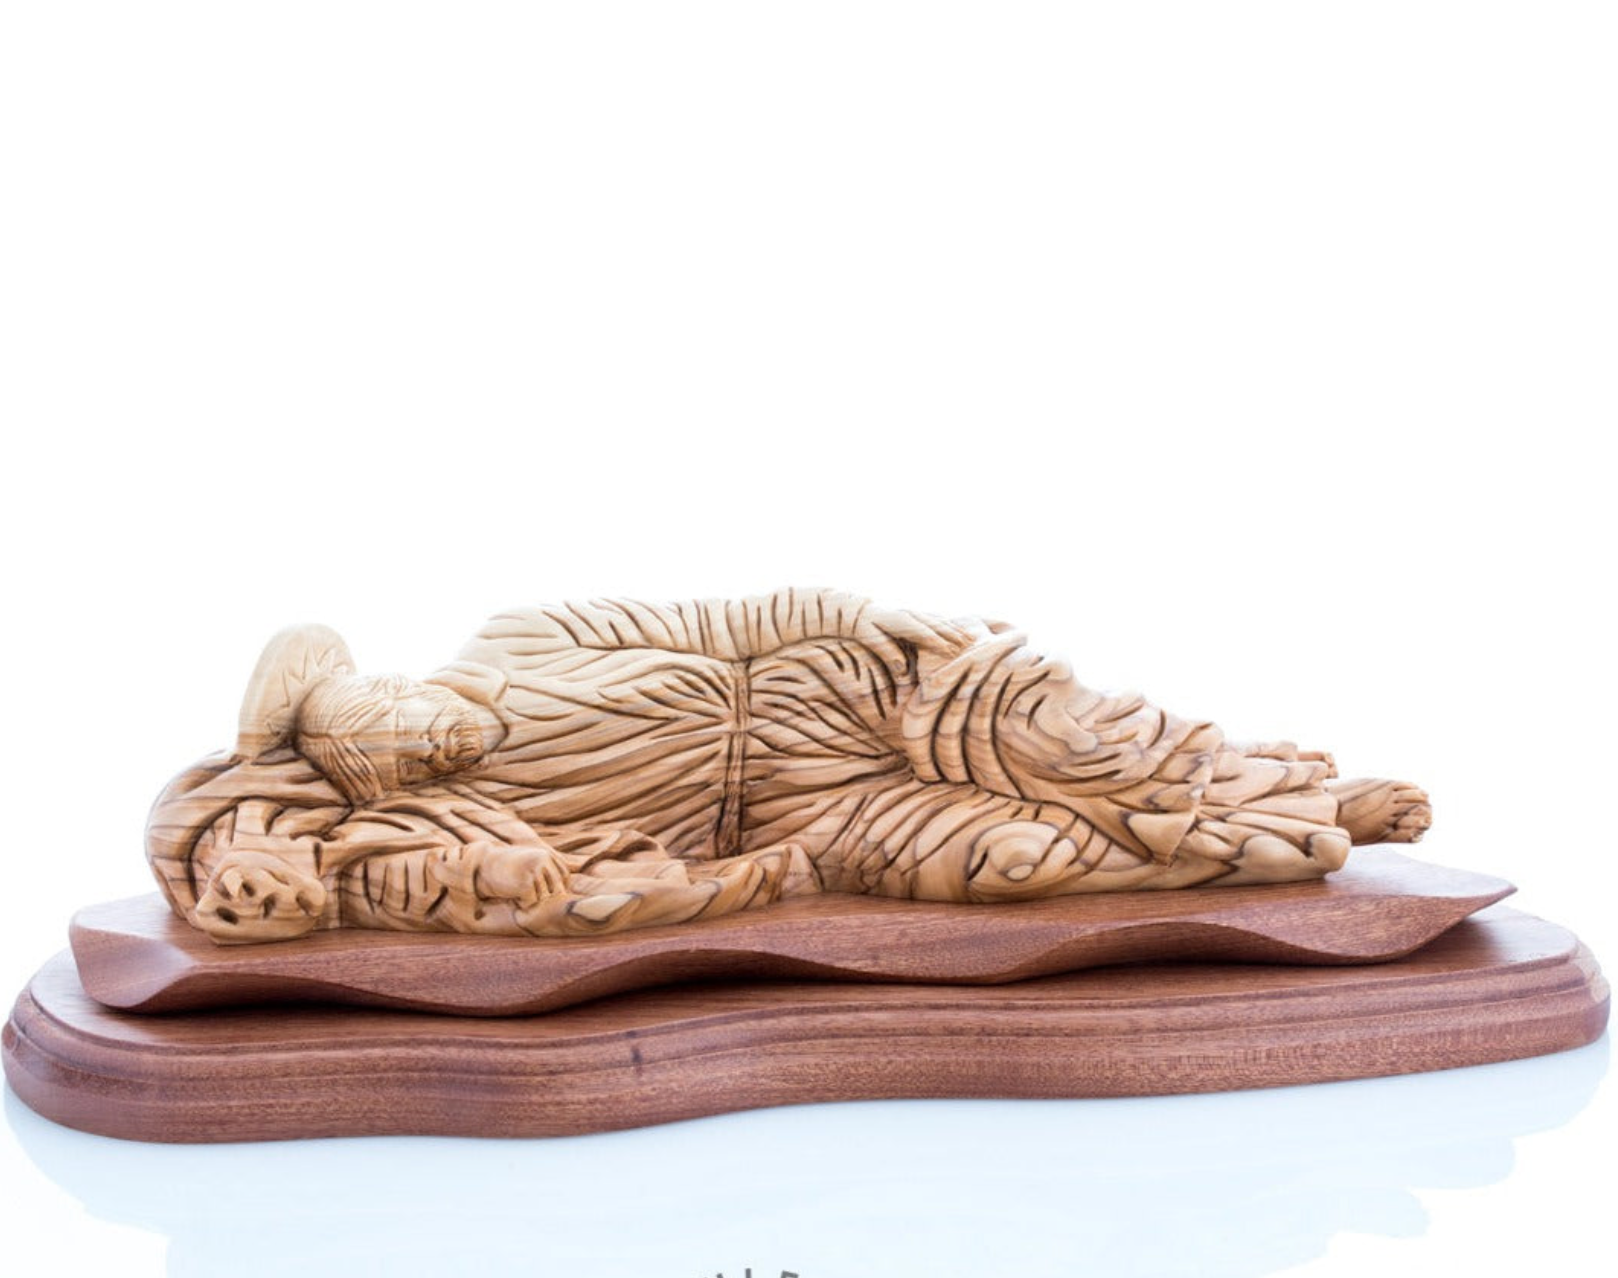 Sleeping Saint Joesph wood carving from Olive Wood